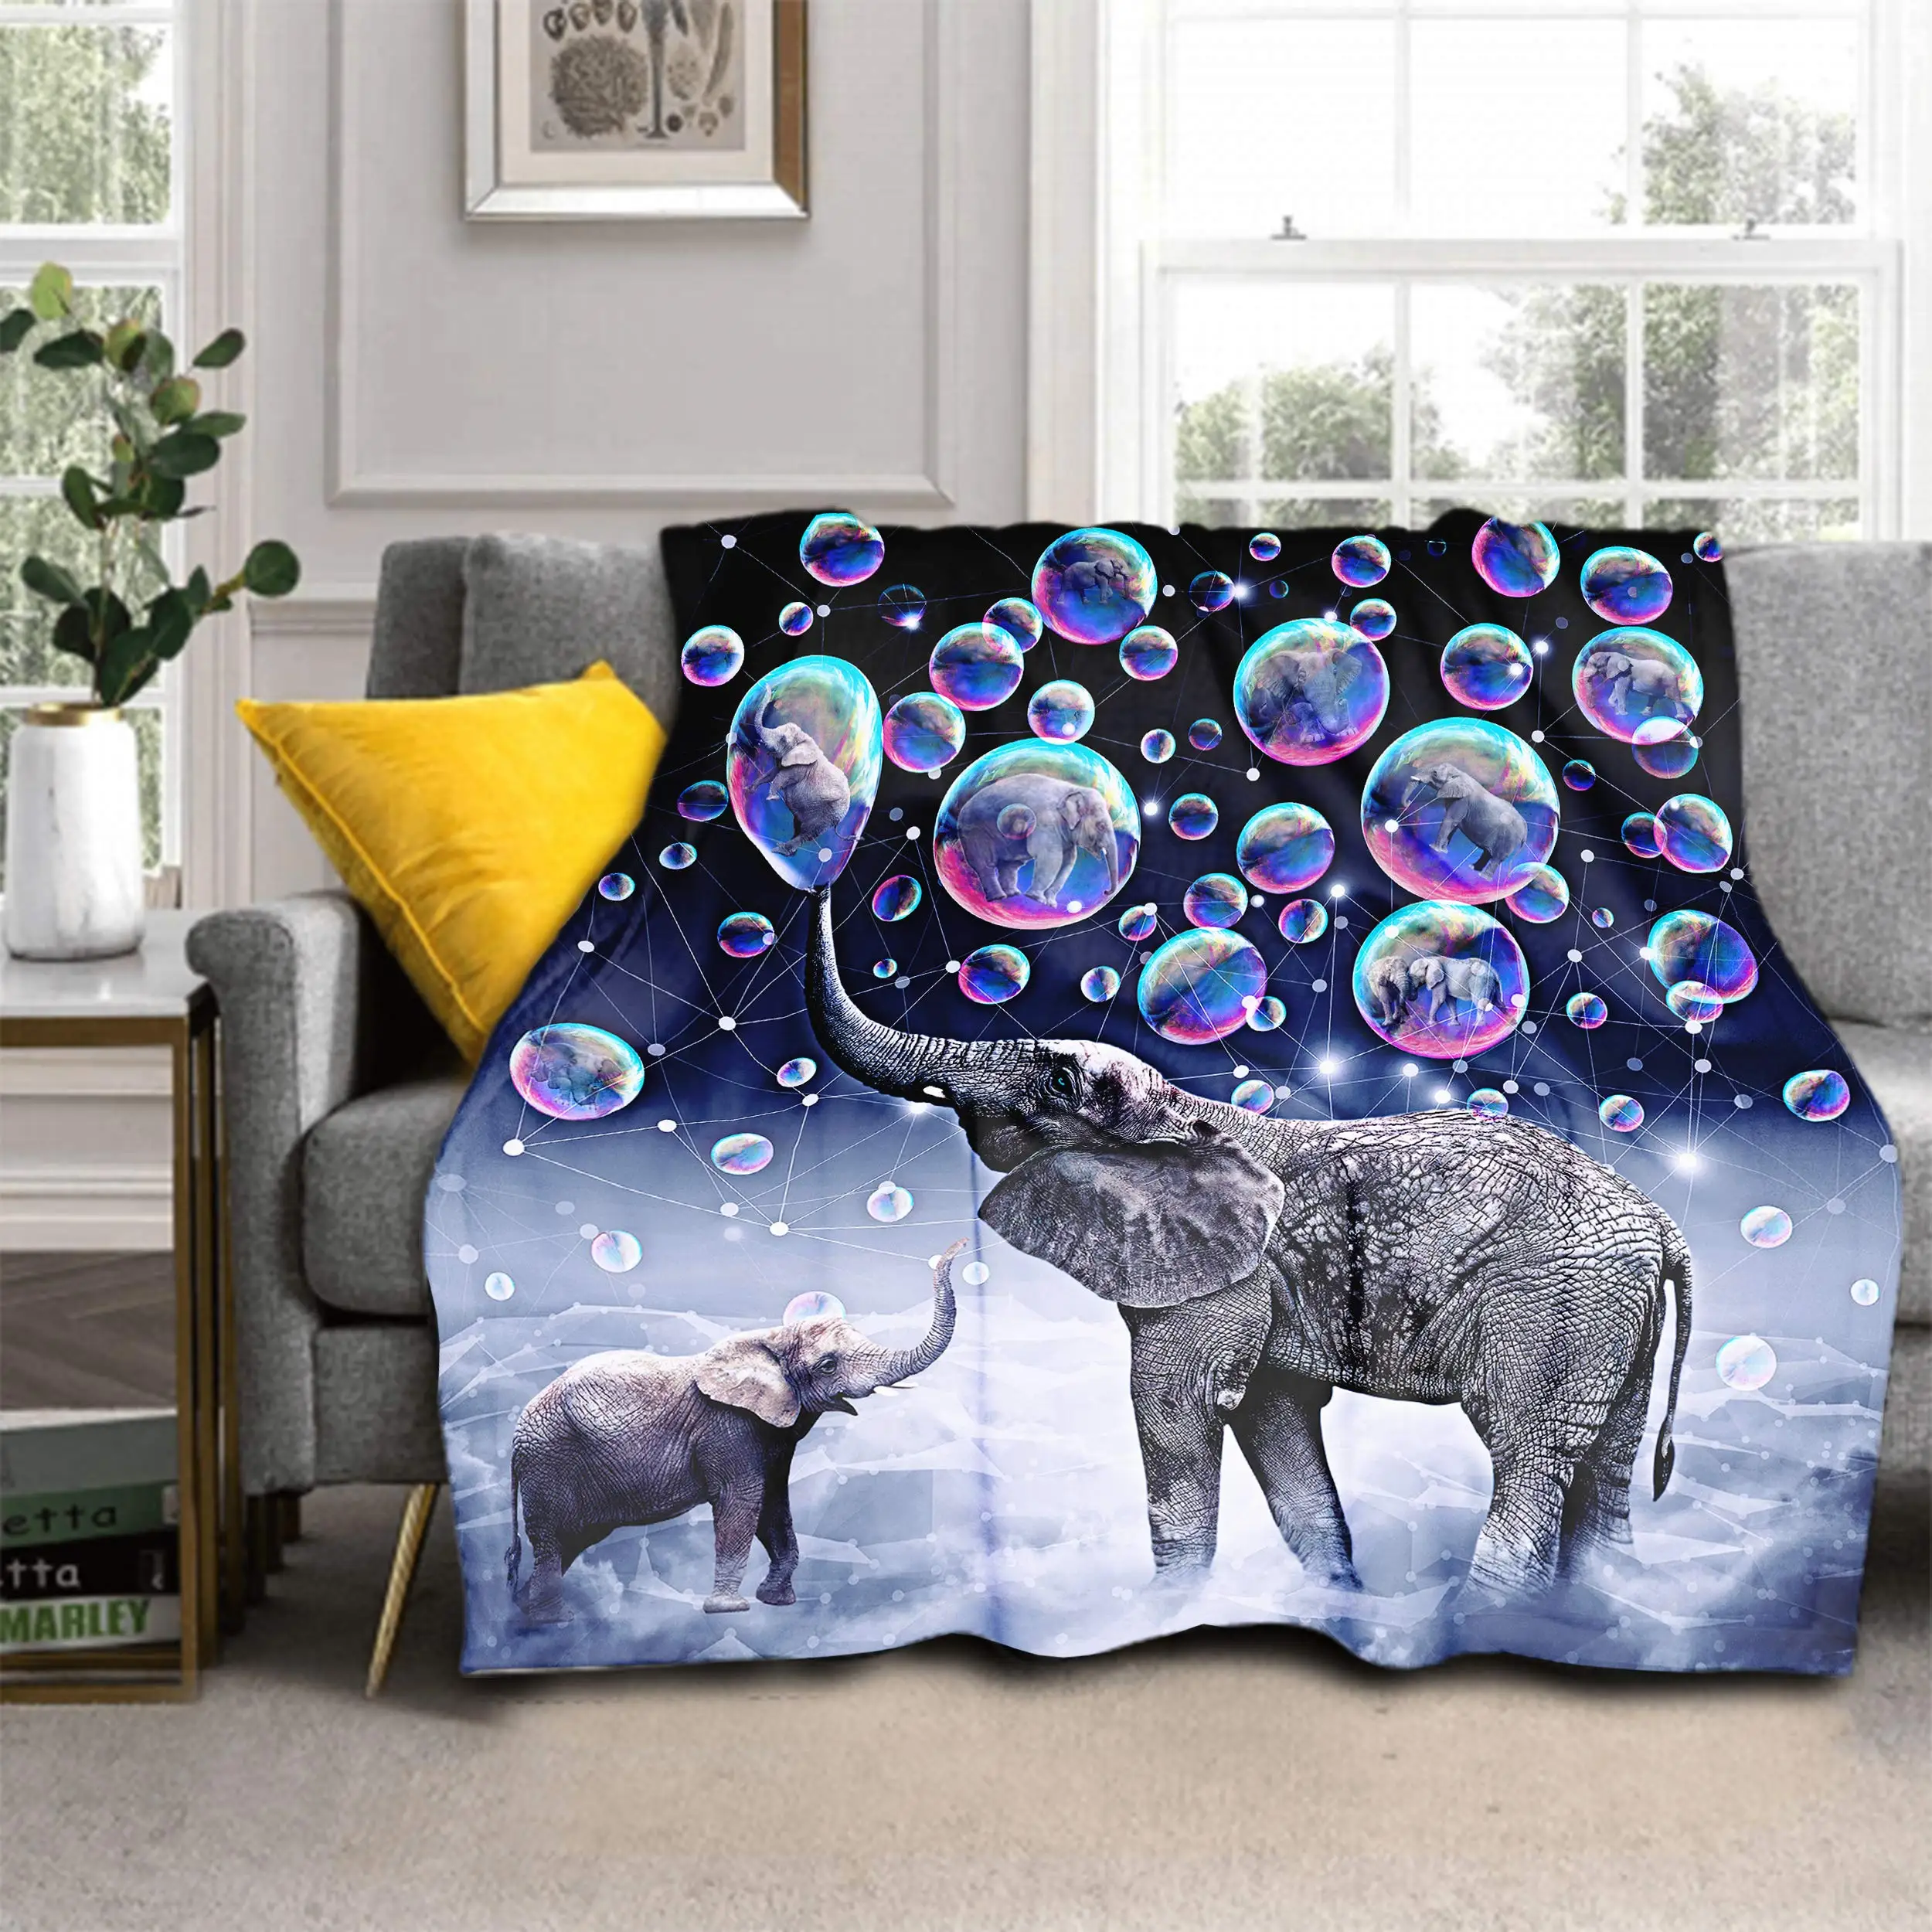 

Elephant Blanket Cute African Animals Print Throw Blanket Colorful Dreamy Bubbles Pattern Cozy Warm Flannel Blankets Home Decor